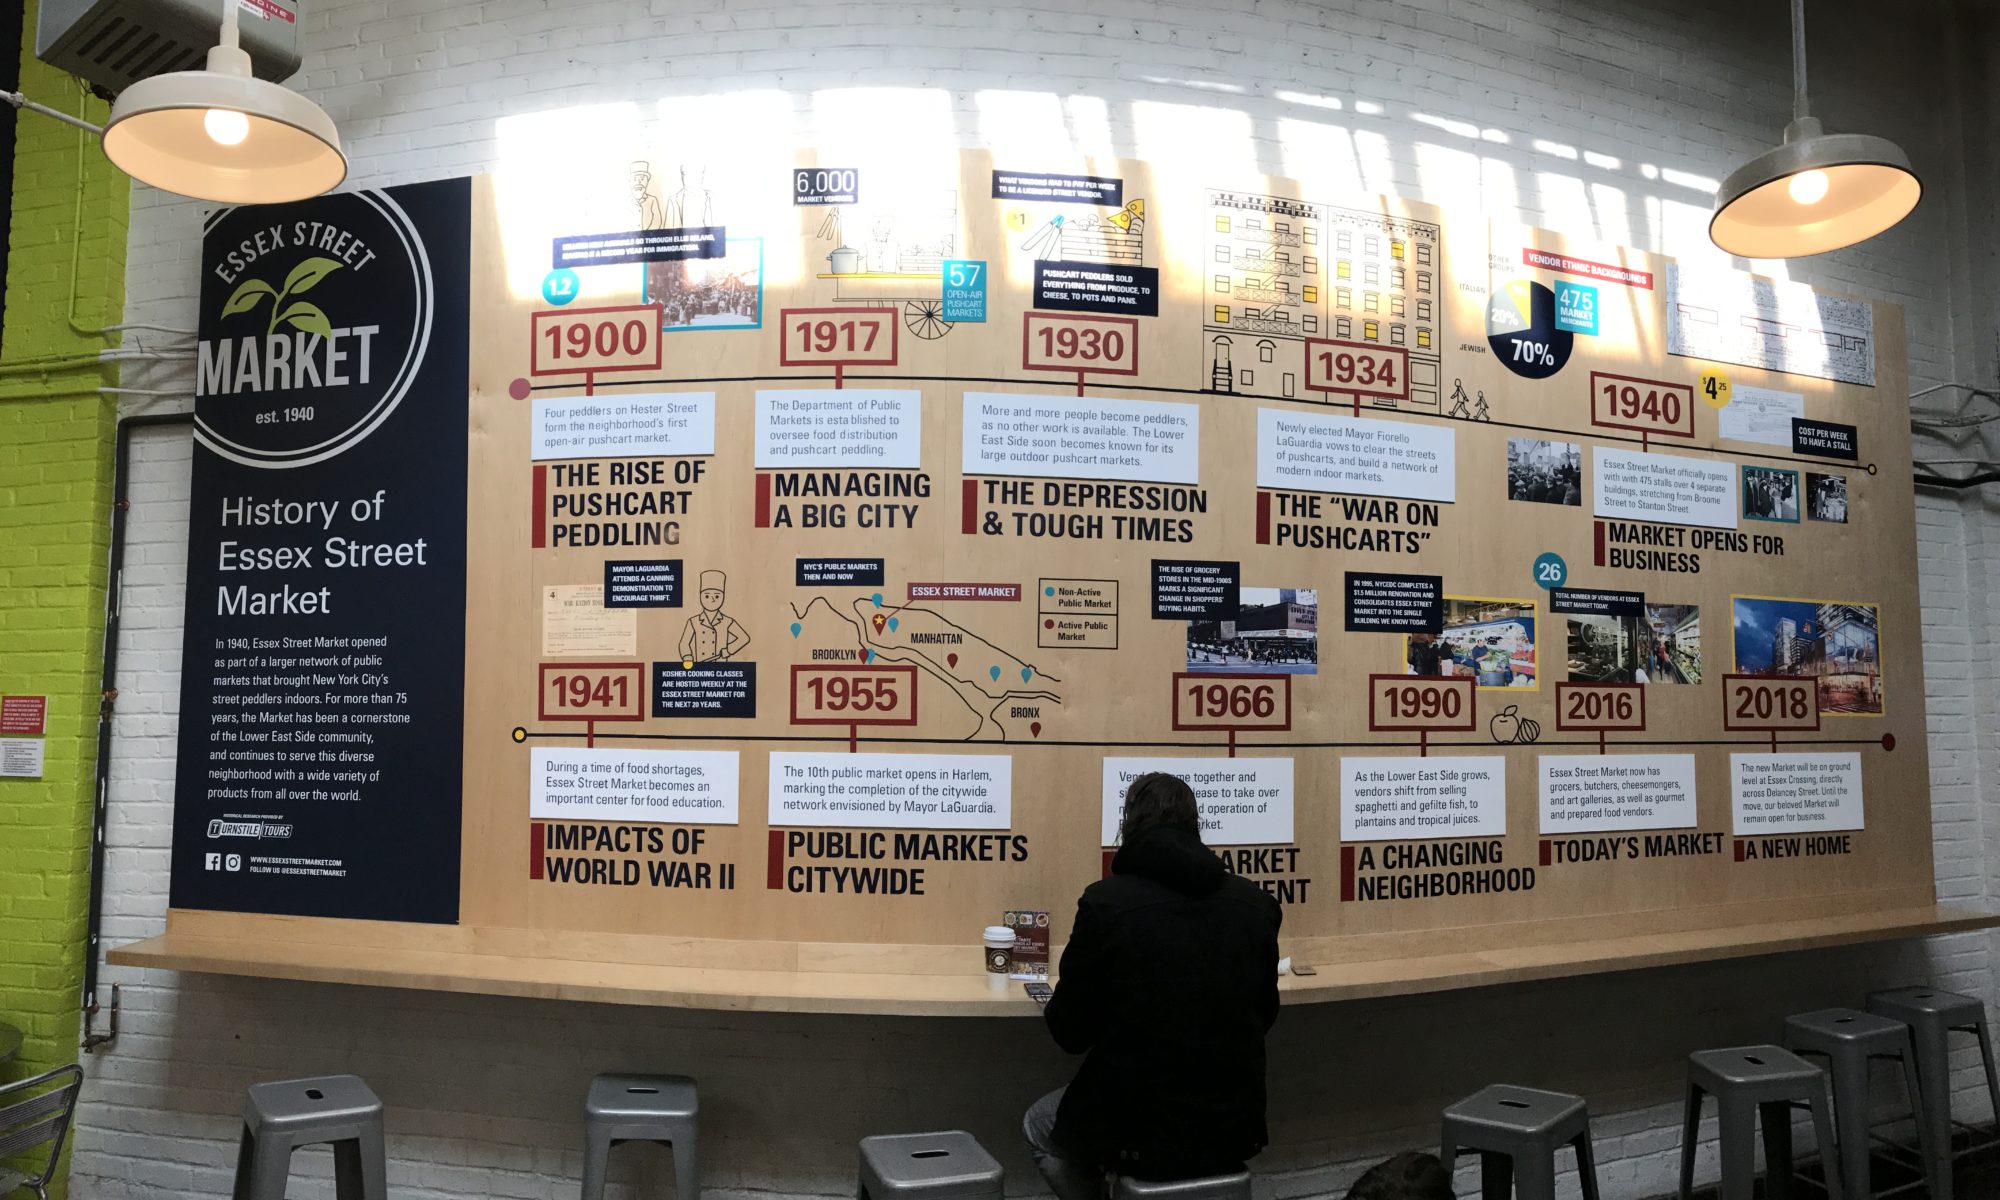 Infographic timeline from 1900 to 2018 showing history of Essex Street Market hanging on the wall with a person sitting on a stool in front of it